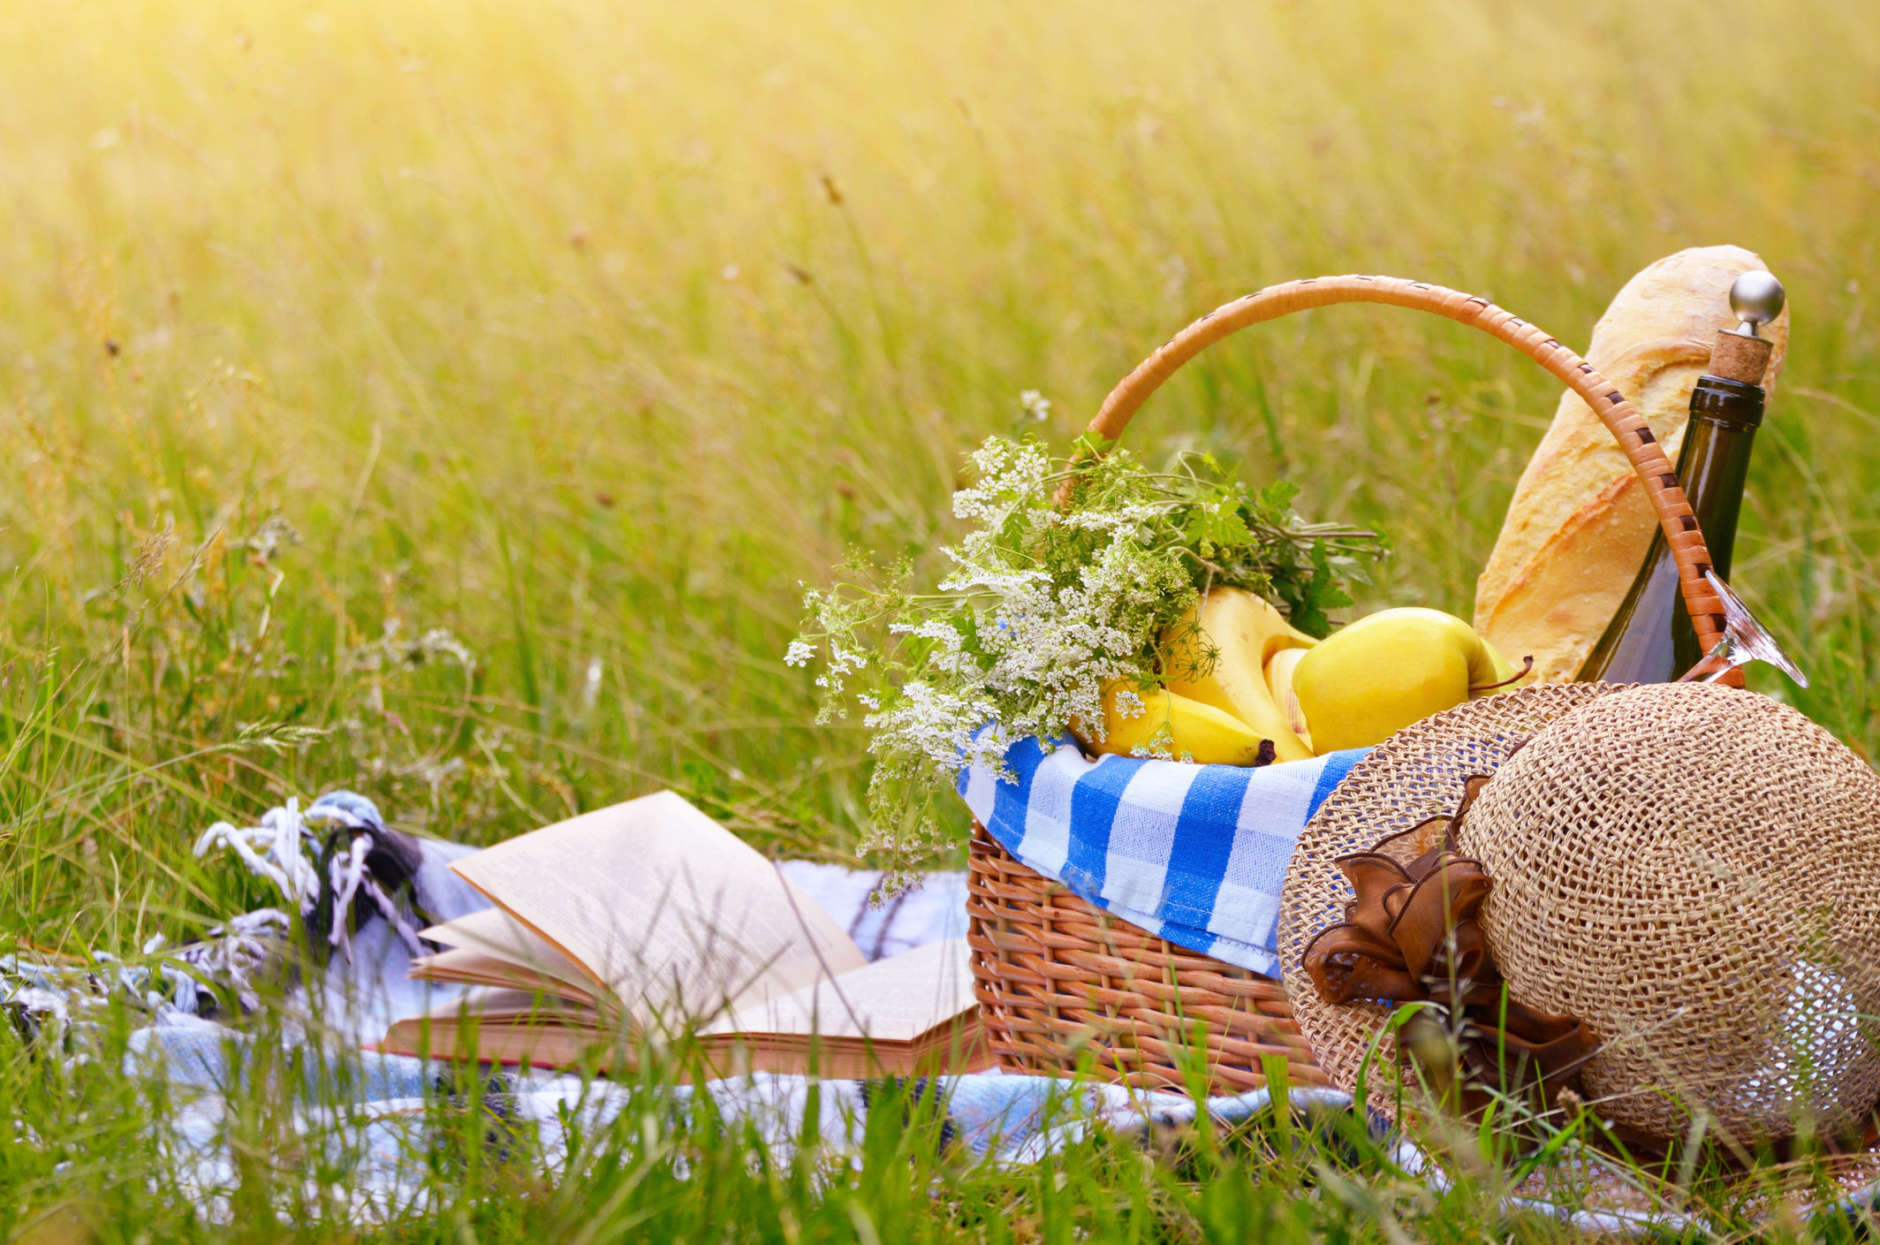 Picnic basket with fruits wine and bread on the grass with book and hat